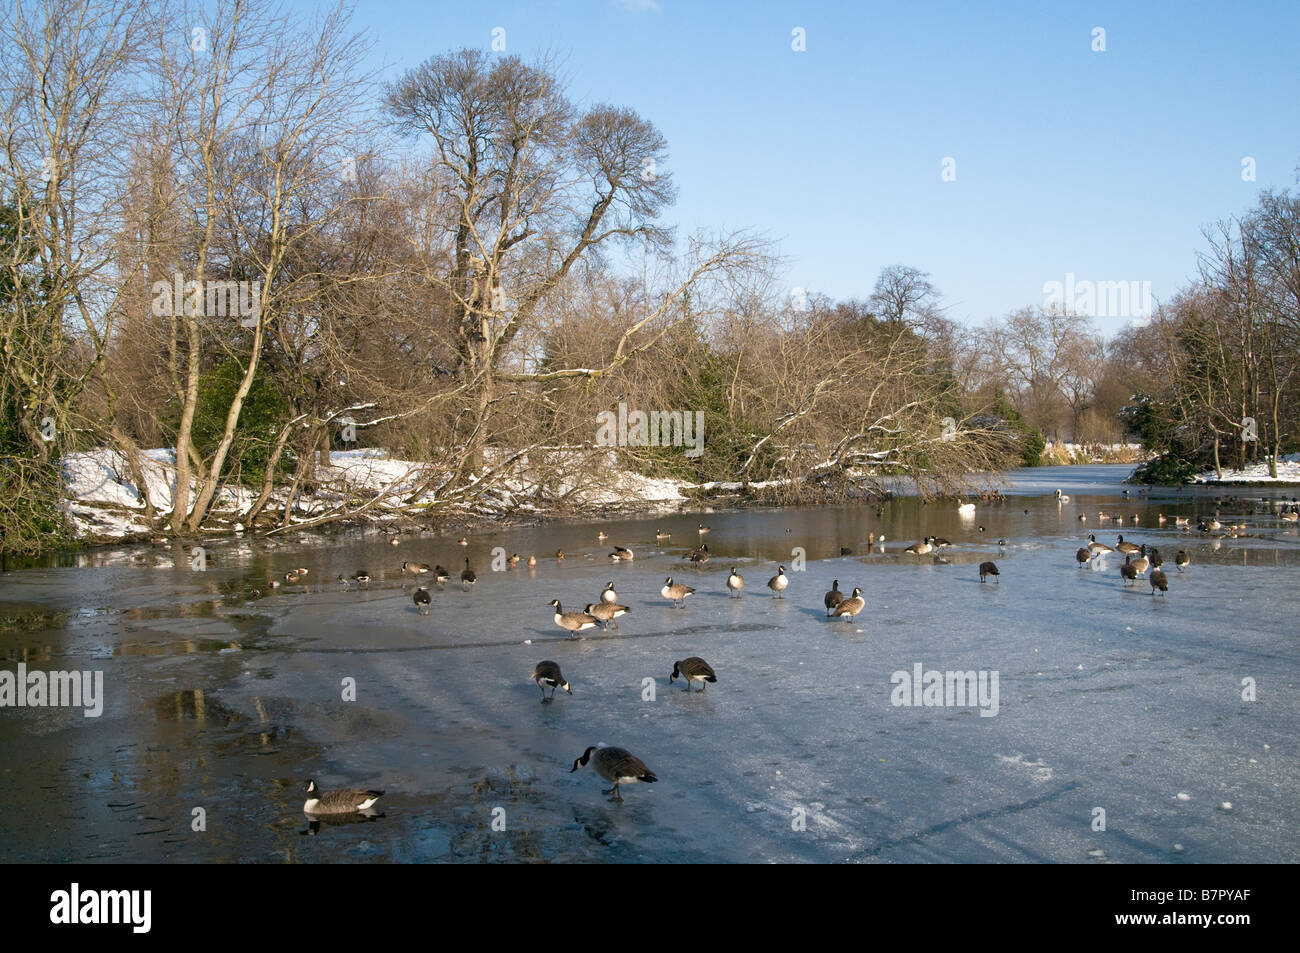 UK.Swans and ducks on lake covered in snow and ice in Victoria Park, London Photo Julio Etchart Stock Photo